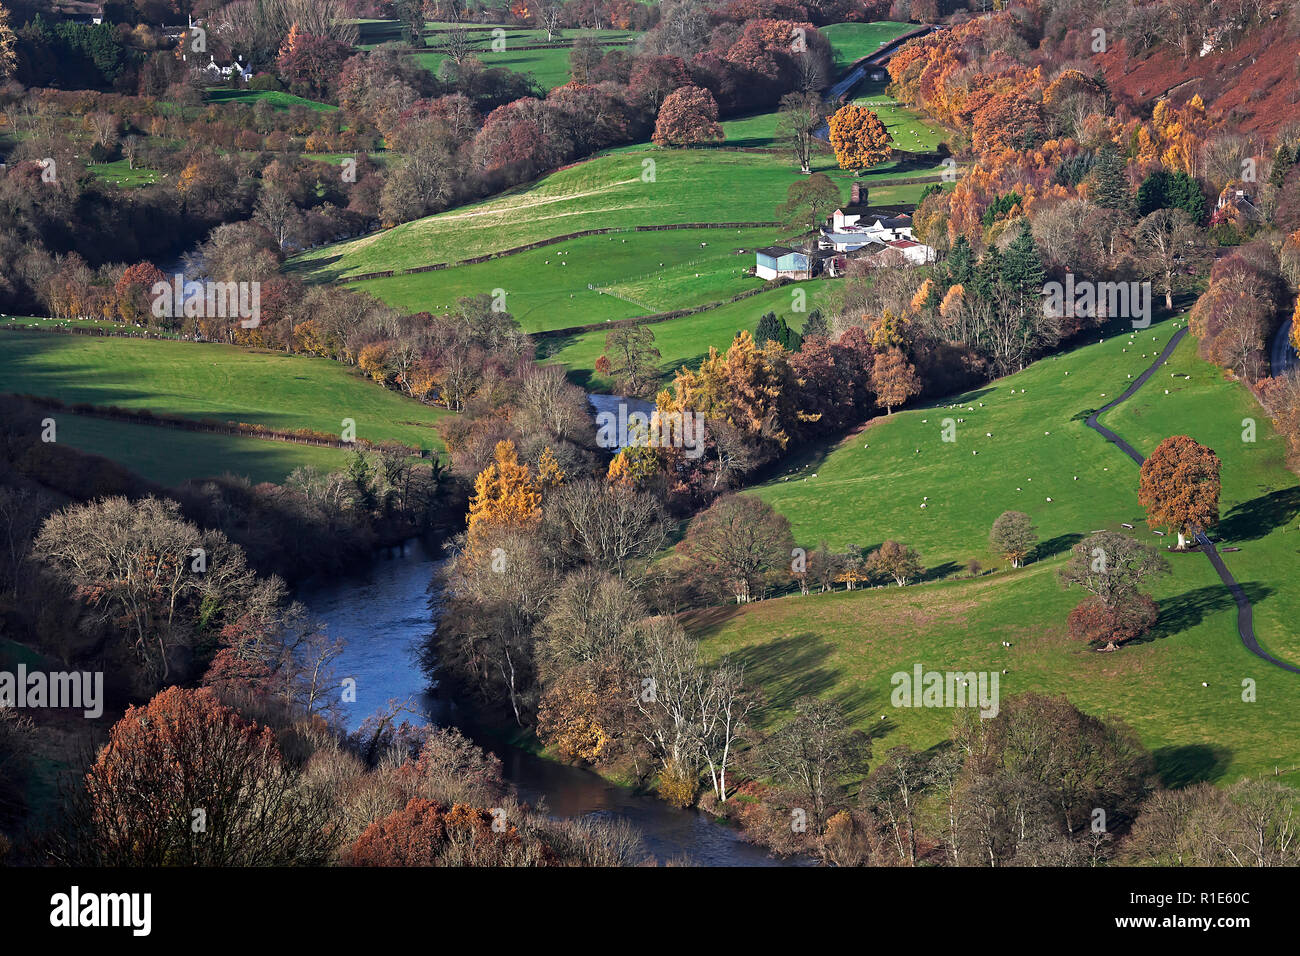 Wye Valley in Autumn near Builth Wells with late afternoon light, Wales, UK Stock Photo